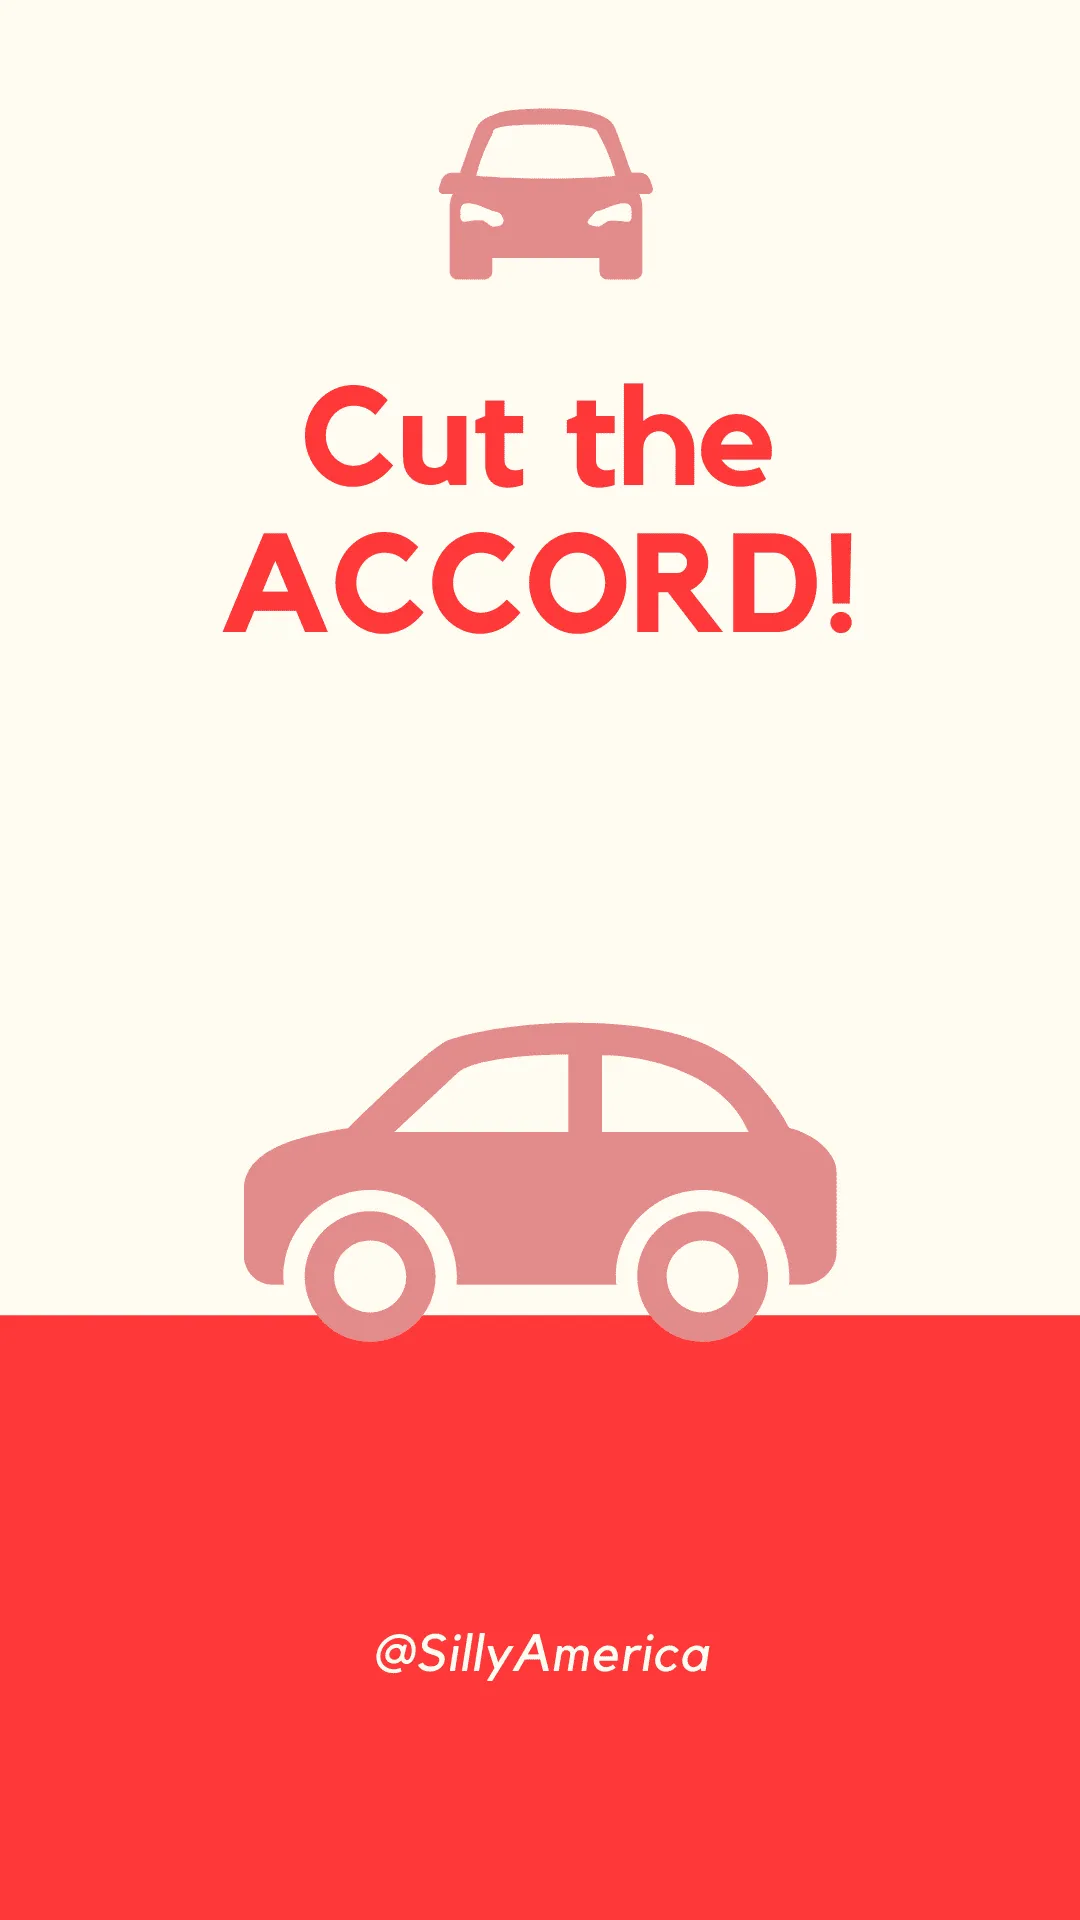 Cut the ACCORD! - Car Puns to fuel your road trip content!